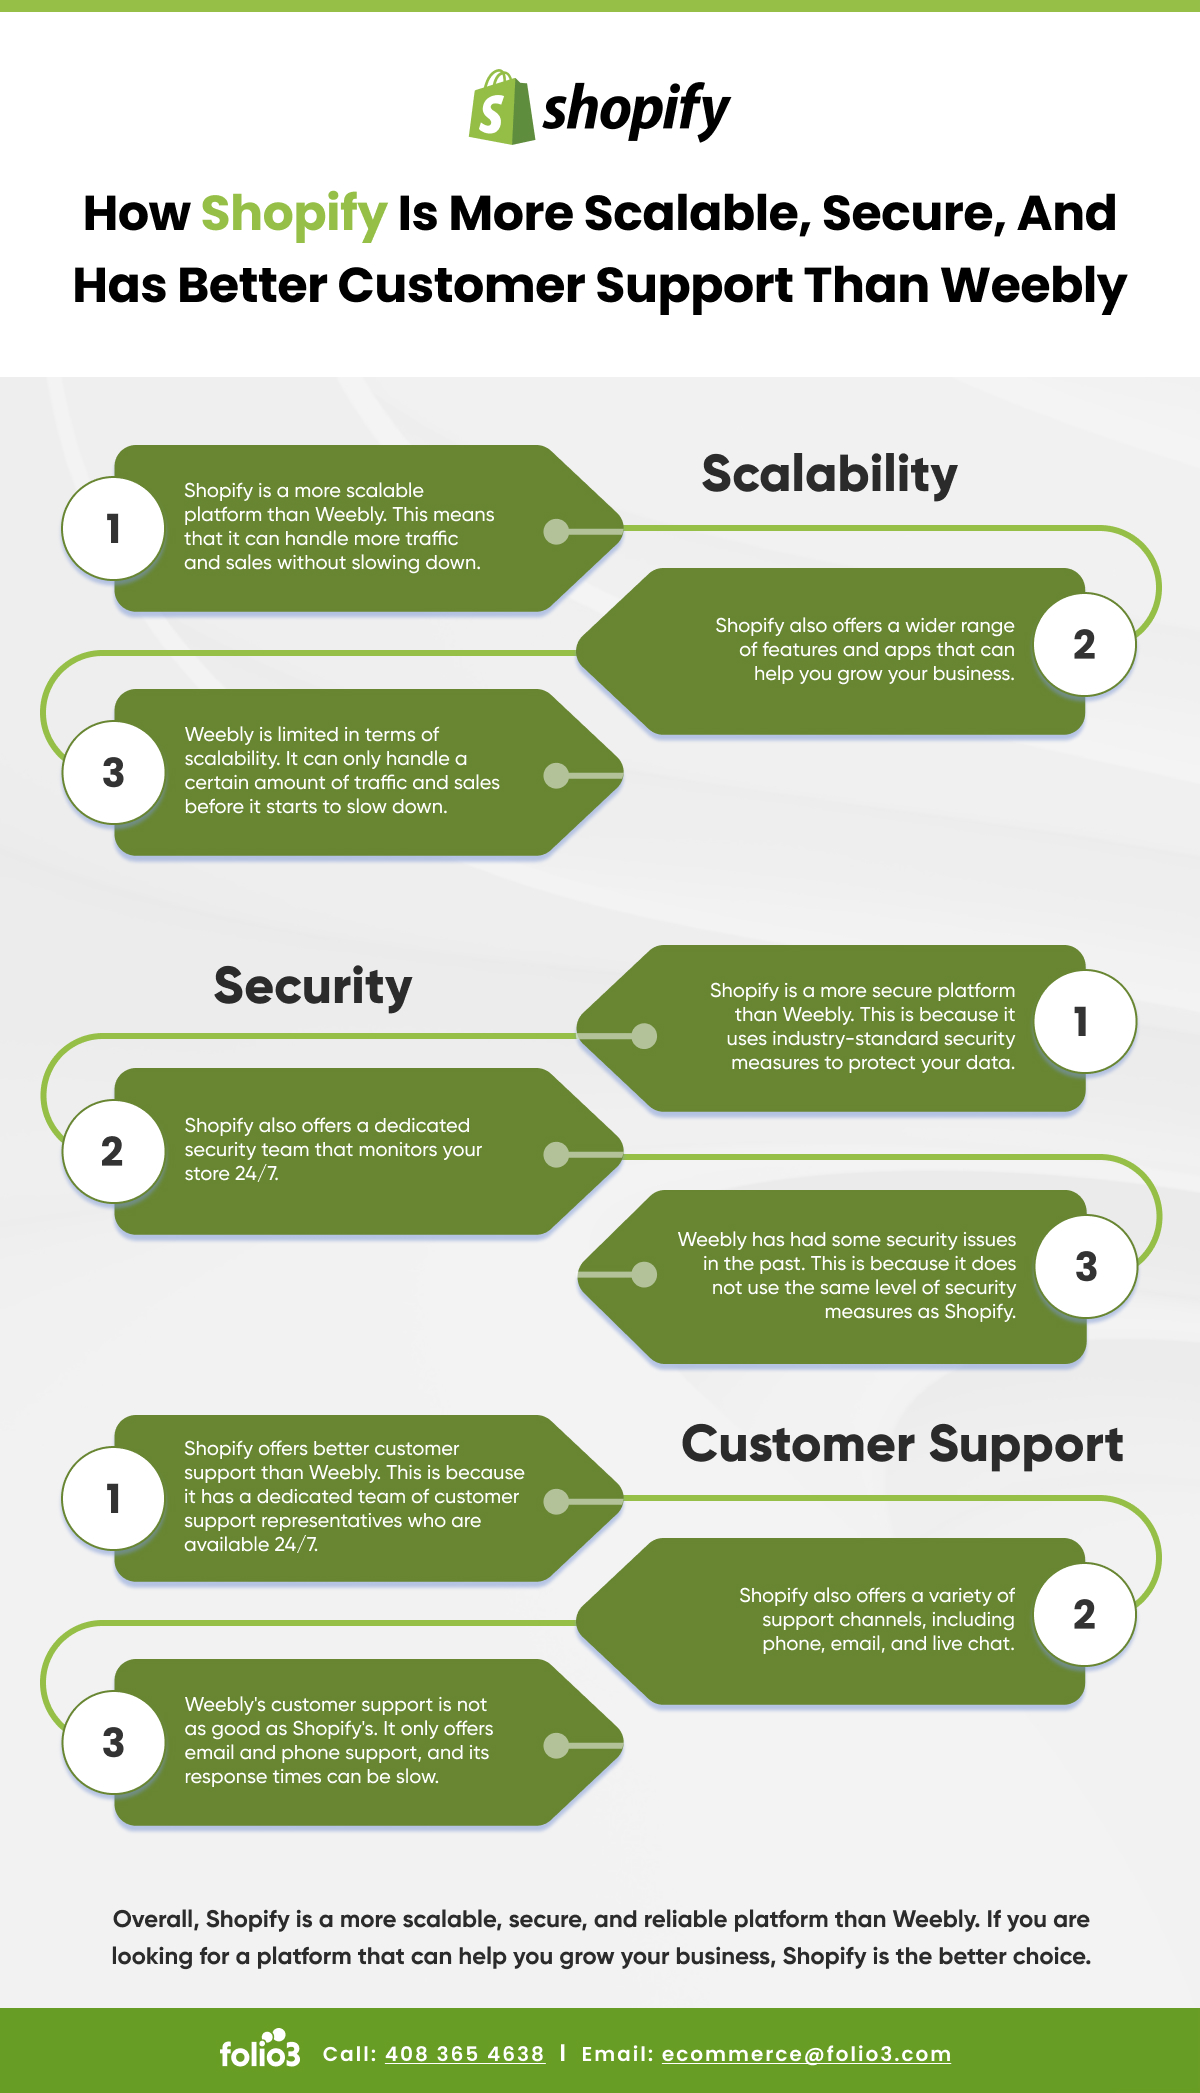 How Shopify is More Scalable, Secure, and Has Better Customer Support than Weebly